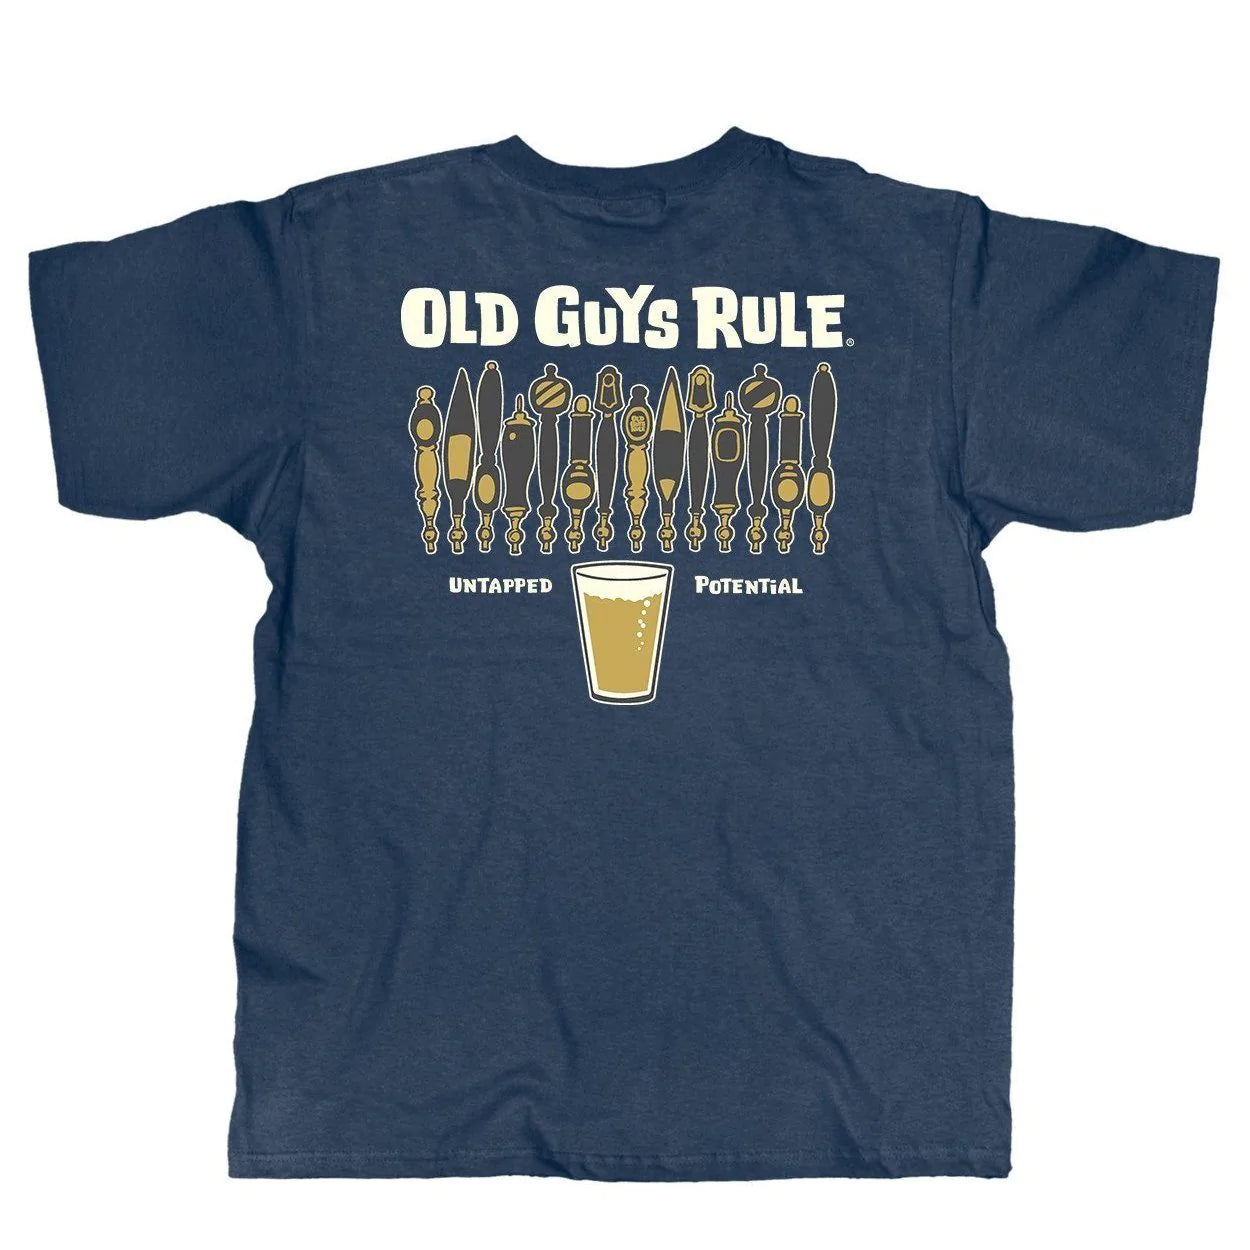 Old Guys Rule: Untapped Potential HTR Navy